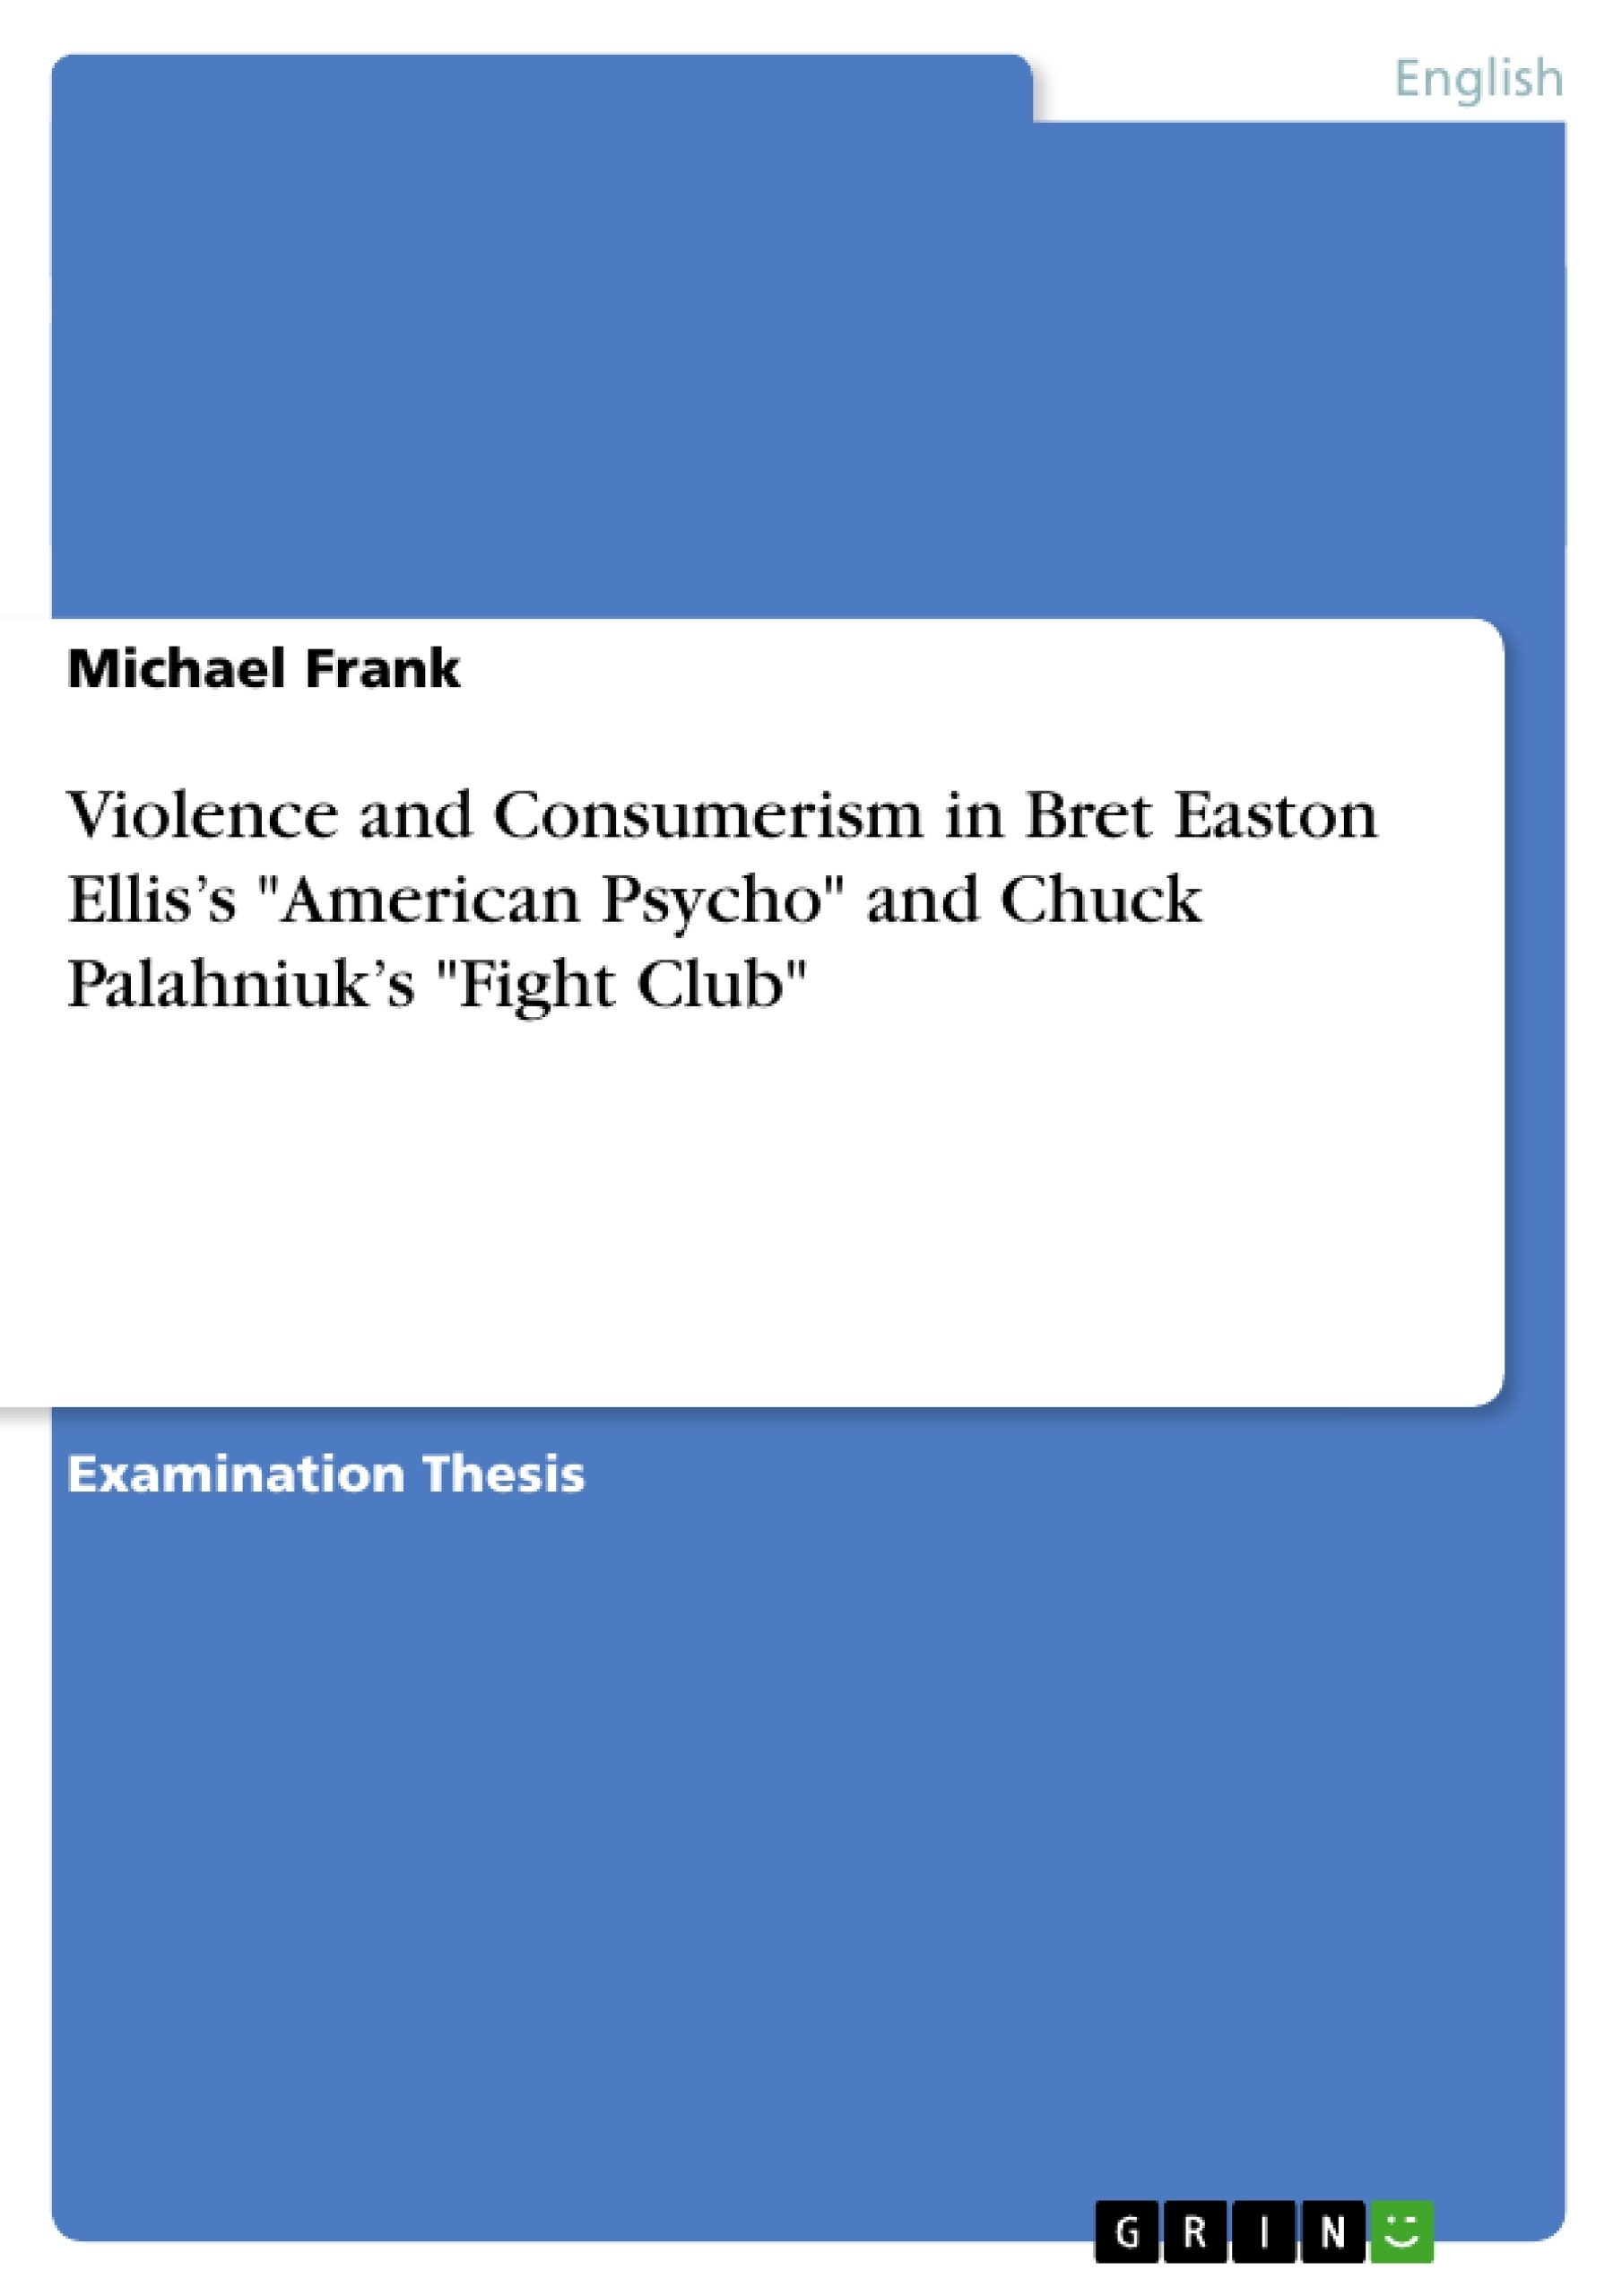 Título: Violence and Consumerism in Bret Easton Ellis’s "American Psycho" and Chuck Palahniuk’s "Fight Club"